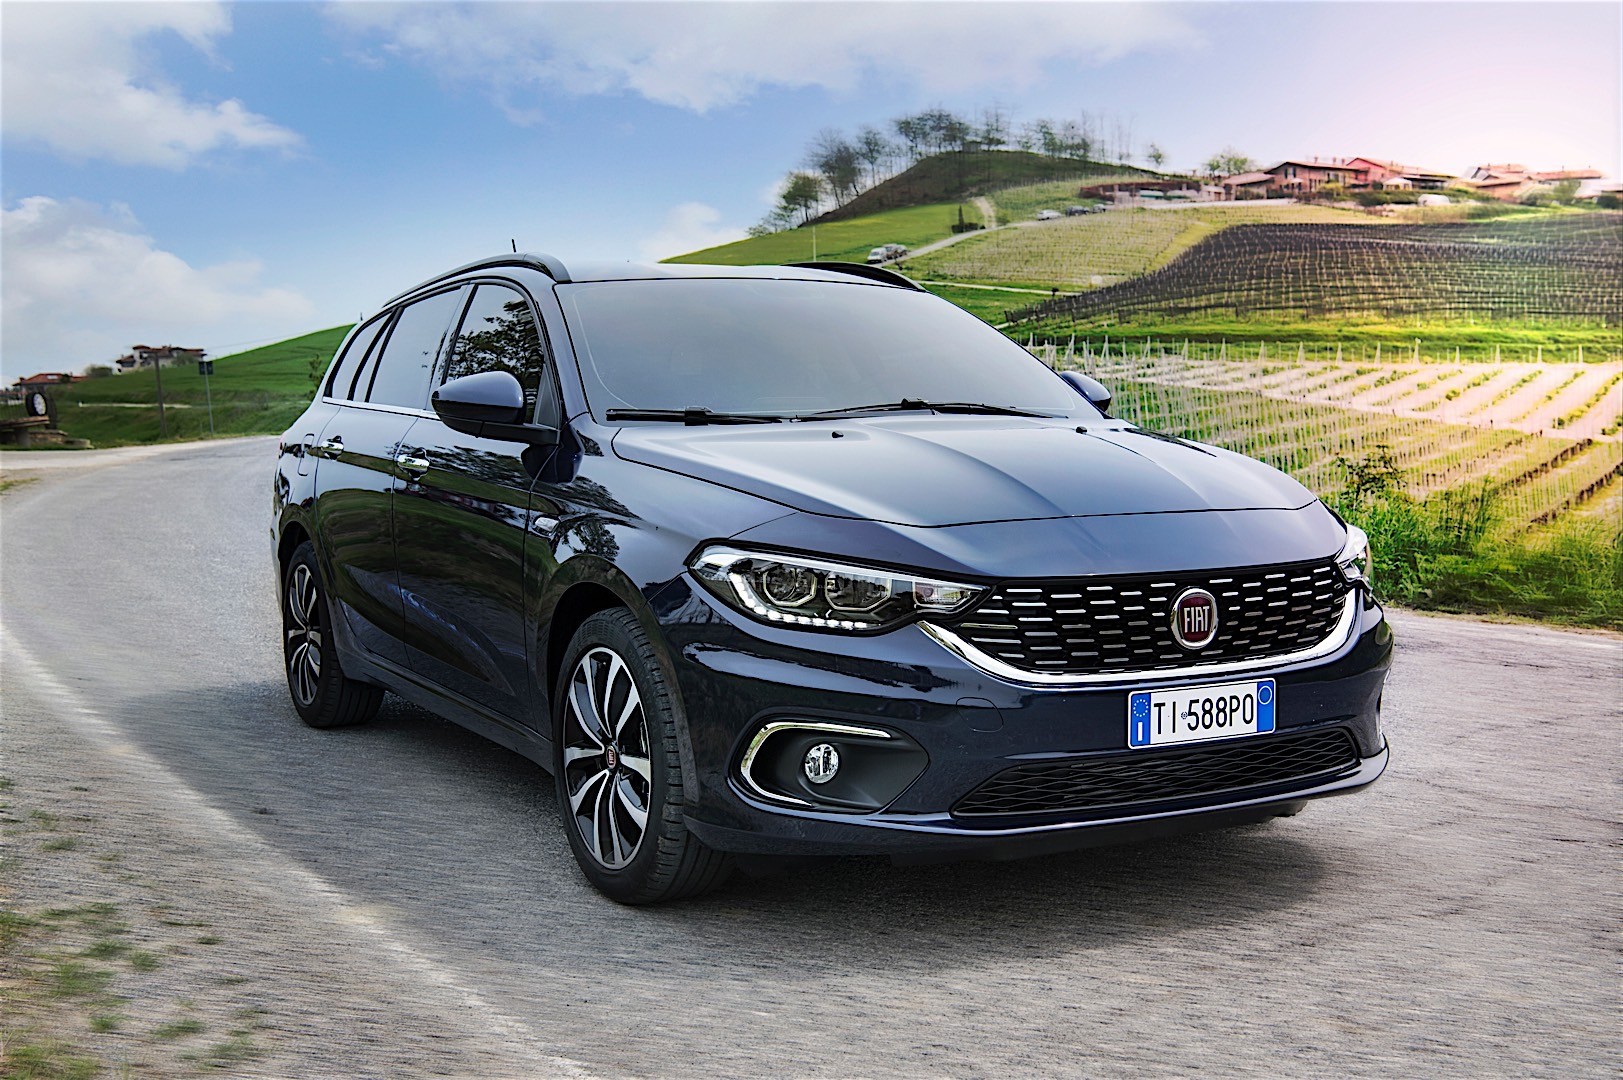 Fiat Tipo Station Wagon (2016-2021) Review